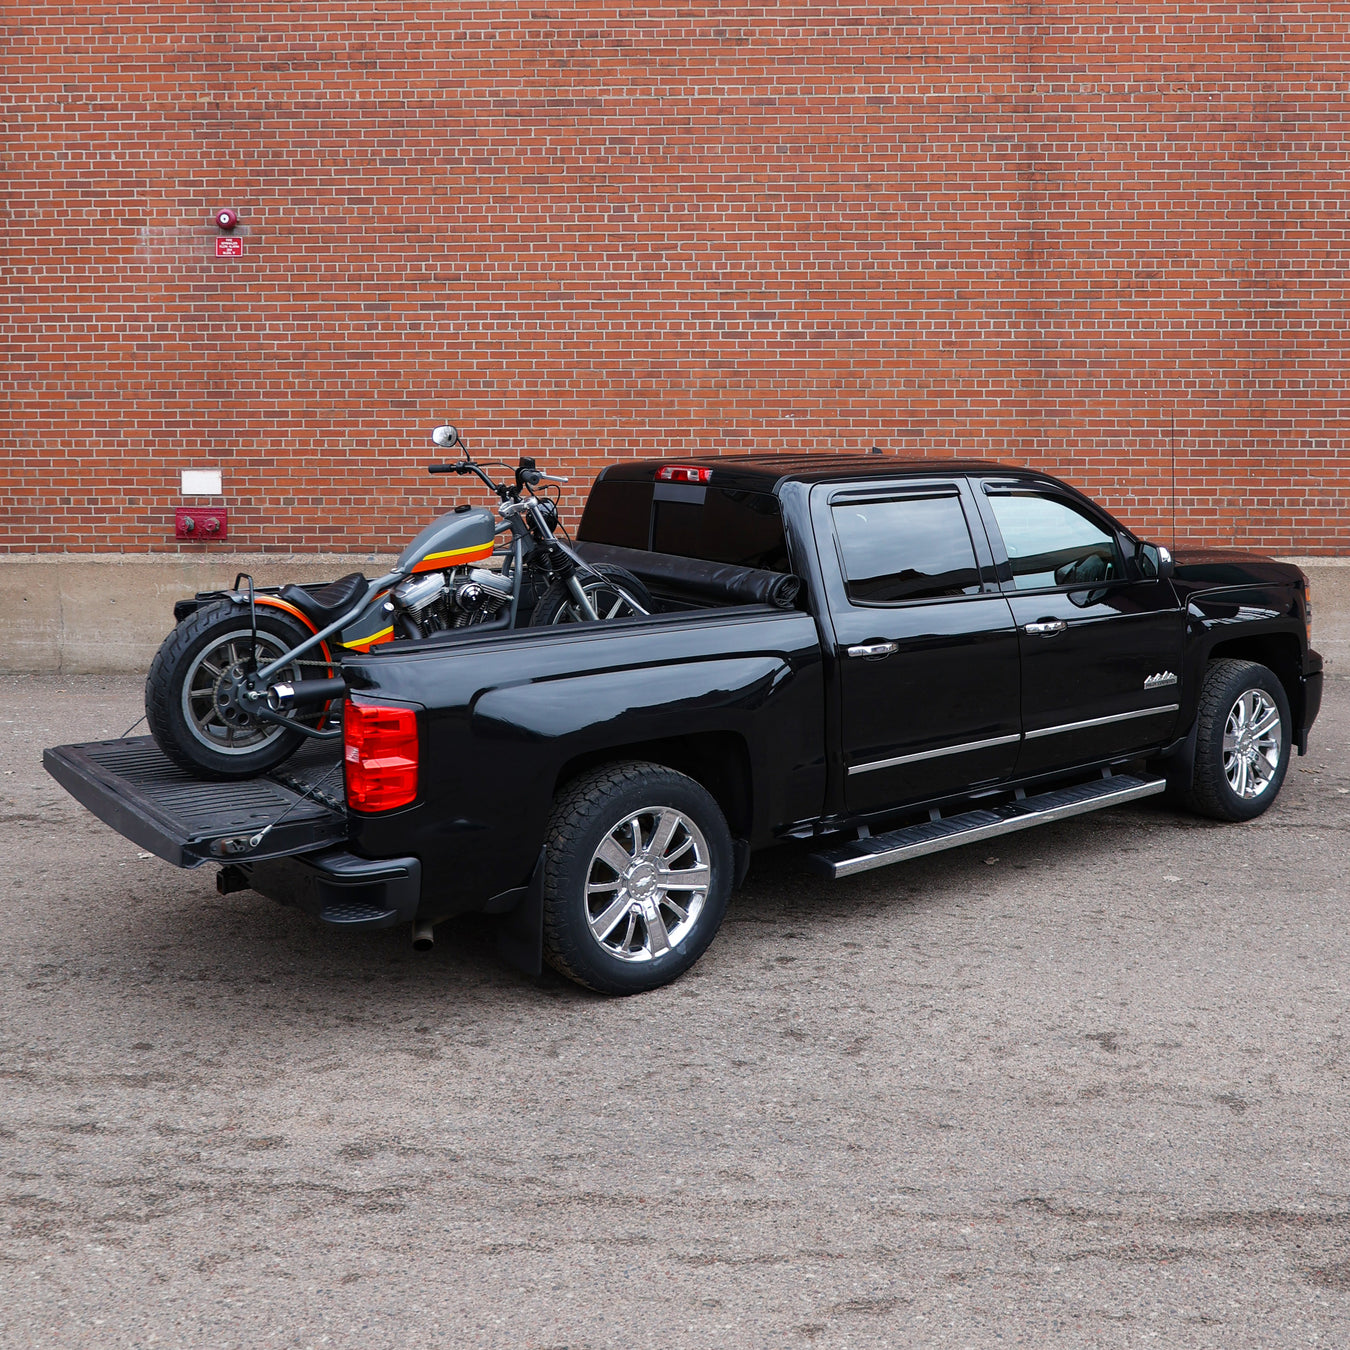 Truck with custom motorcycle in the bed in front of a brick wall